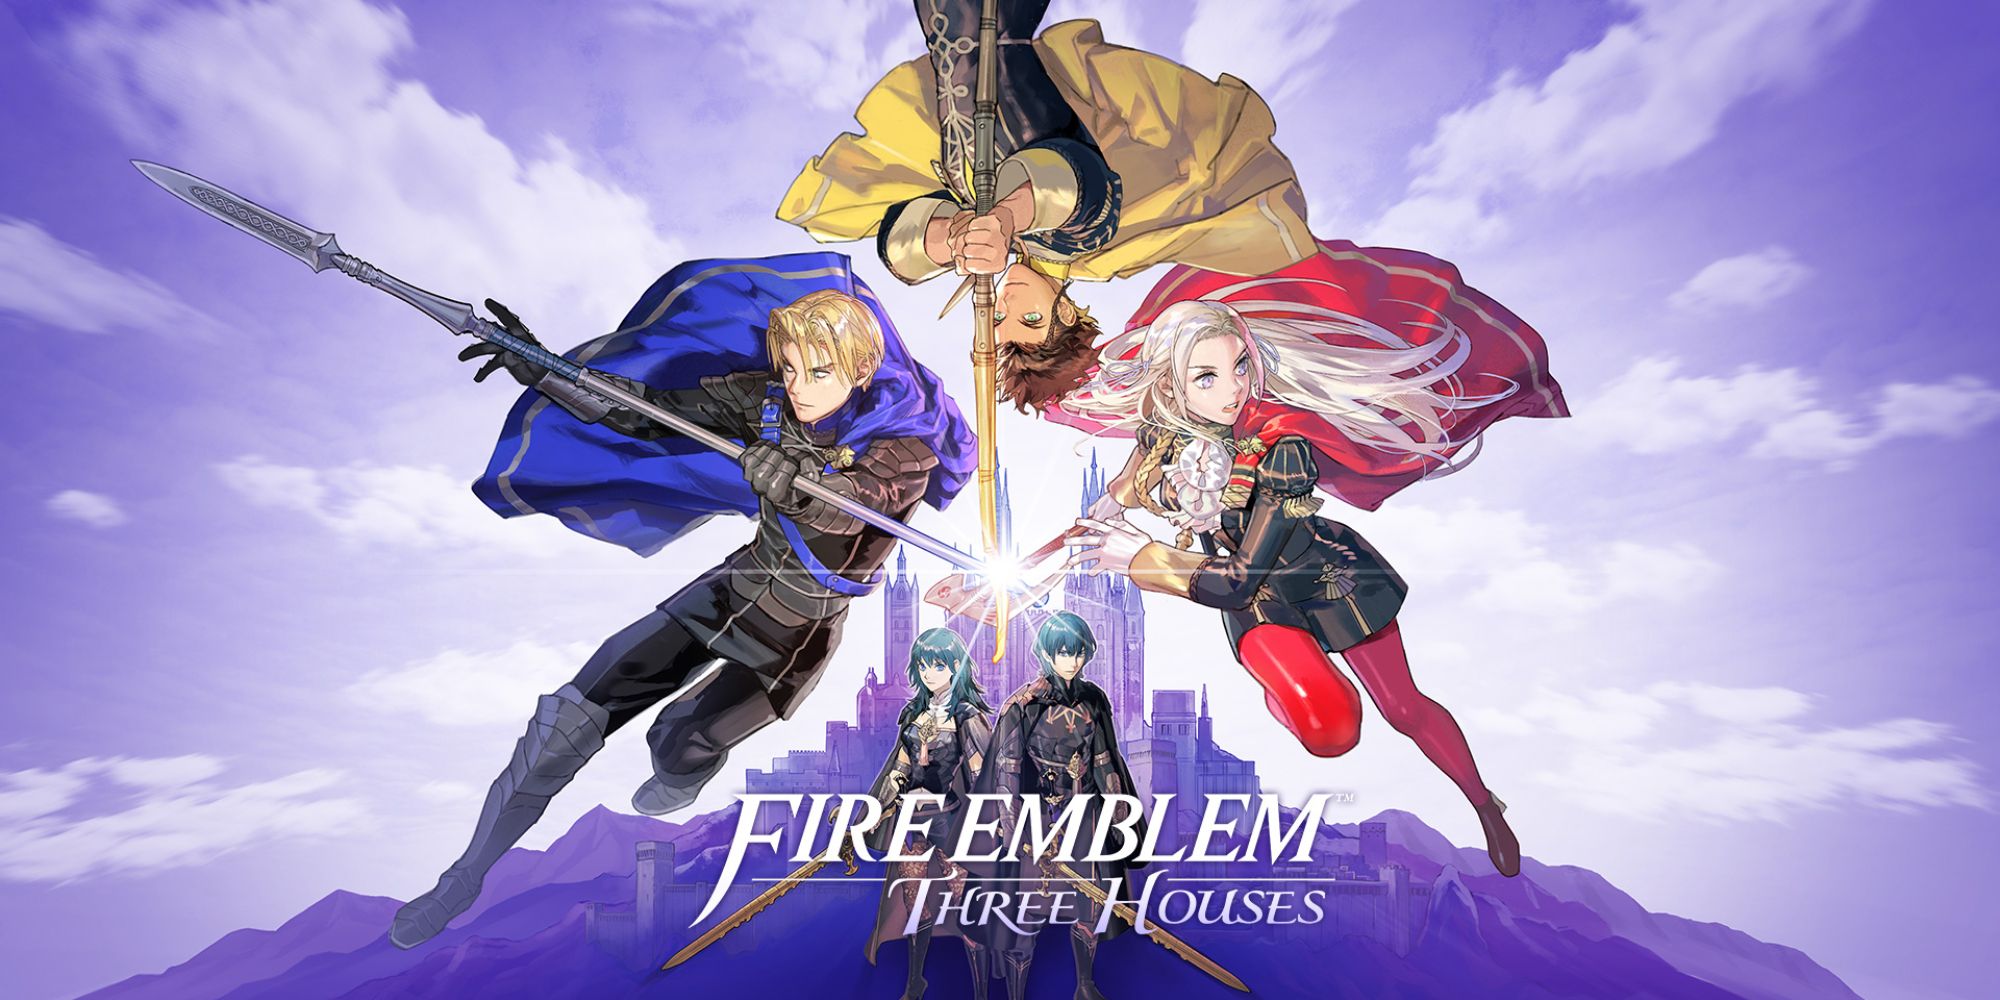 JRPG Battle Themes cover art for the game Fire Emblem Three Houses featuring both the male and female version of Byleth standing beneath Claude, Edelgard and Dimitri